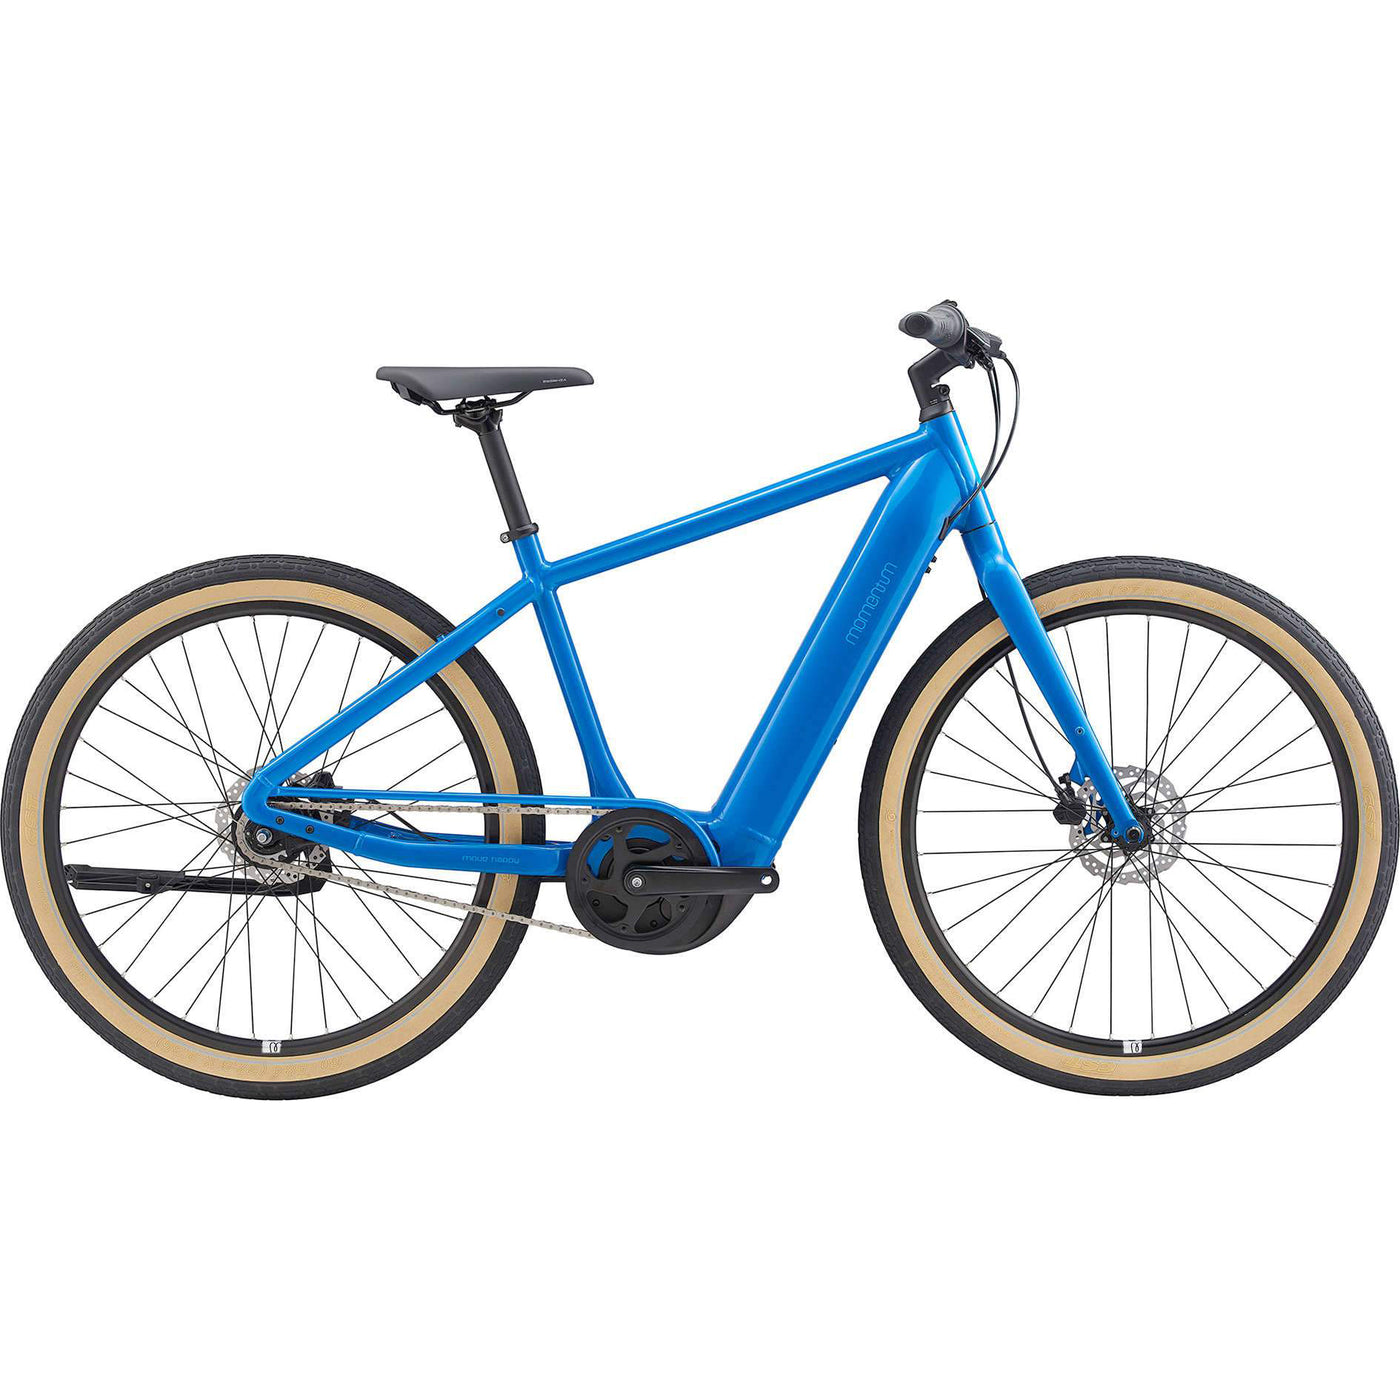 2021 Giant Momentum Transend E+ Electric Bicycle